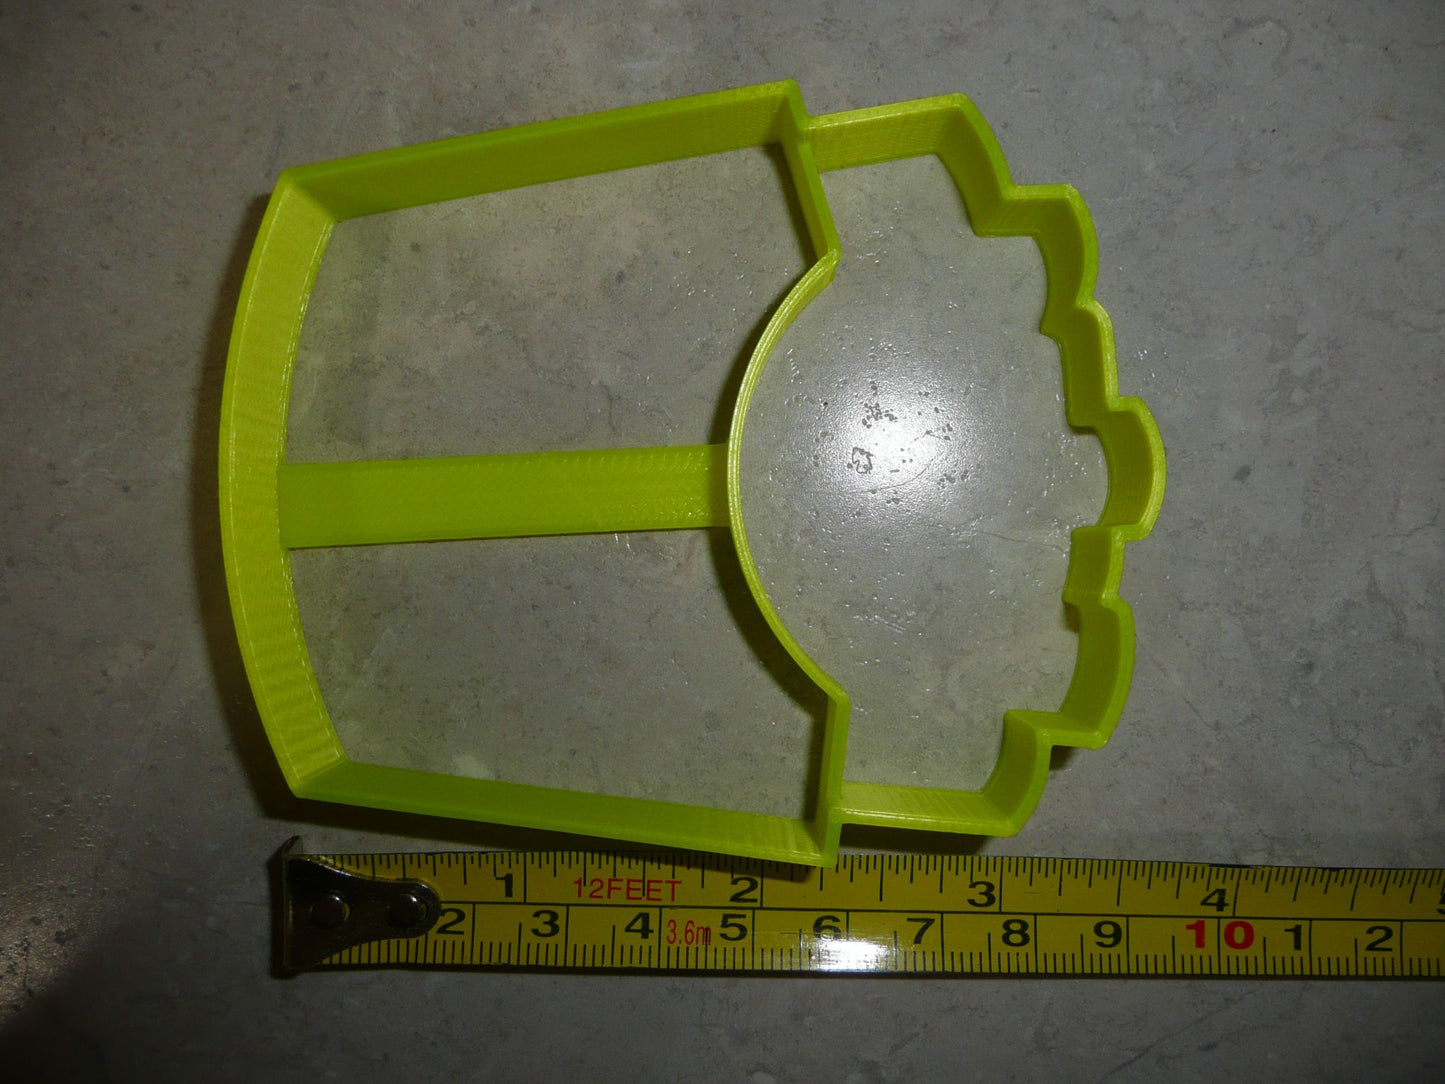 French Fries Fast Food Fried Potato Lunch Dinner Cookie Cutter USA PR2906